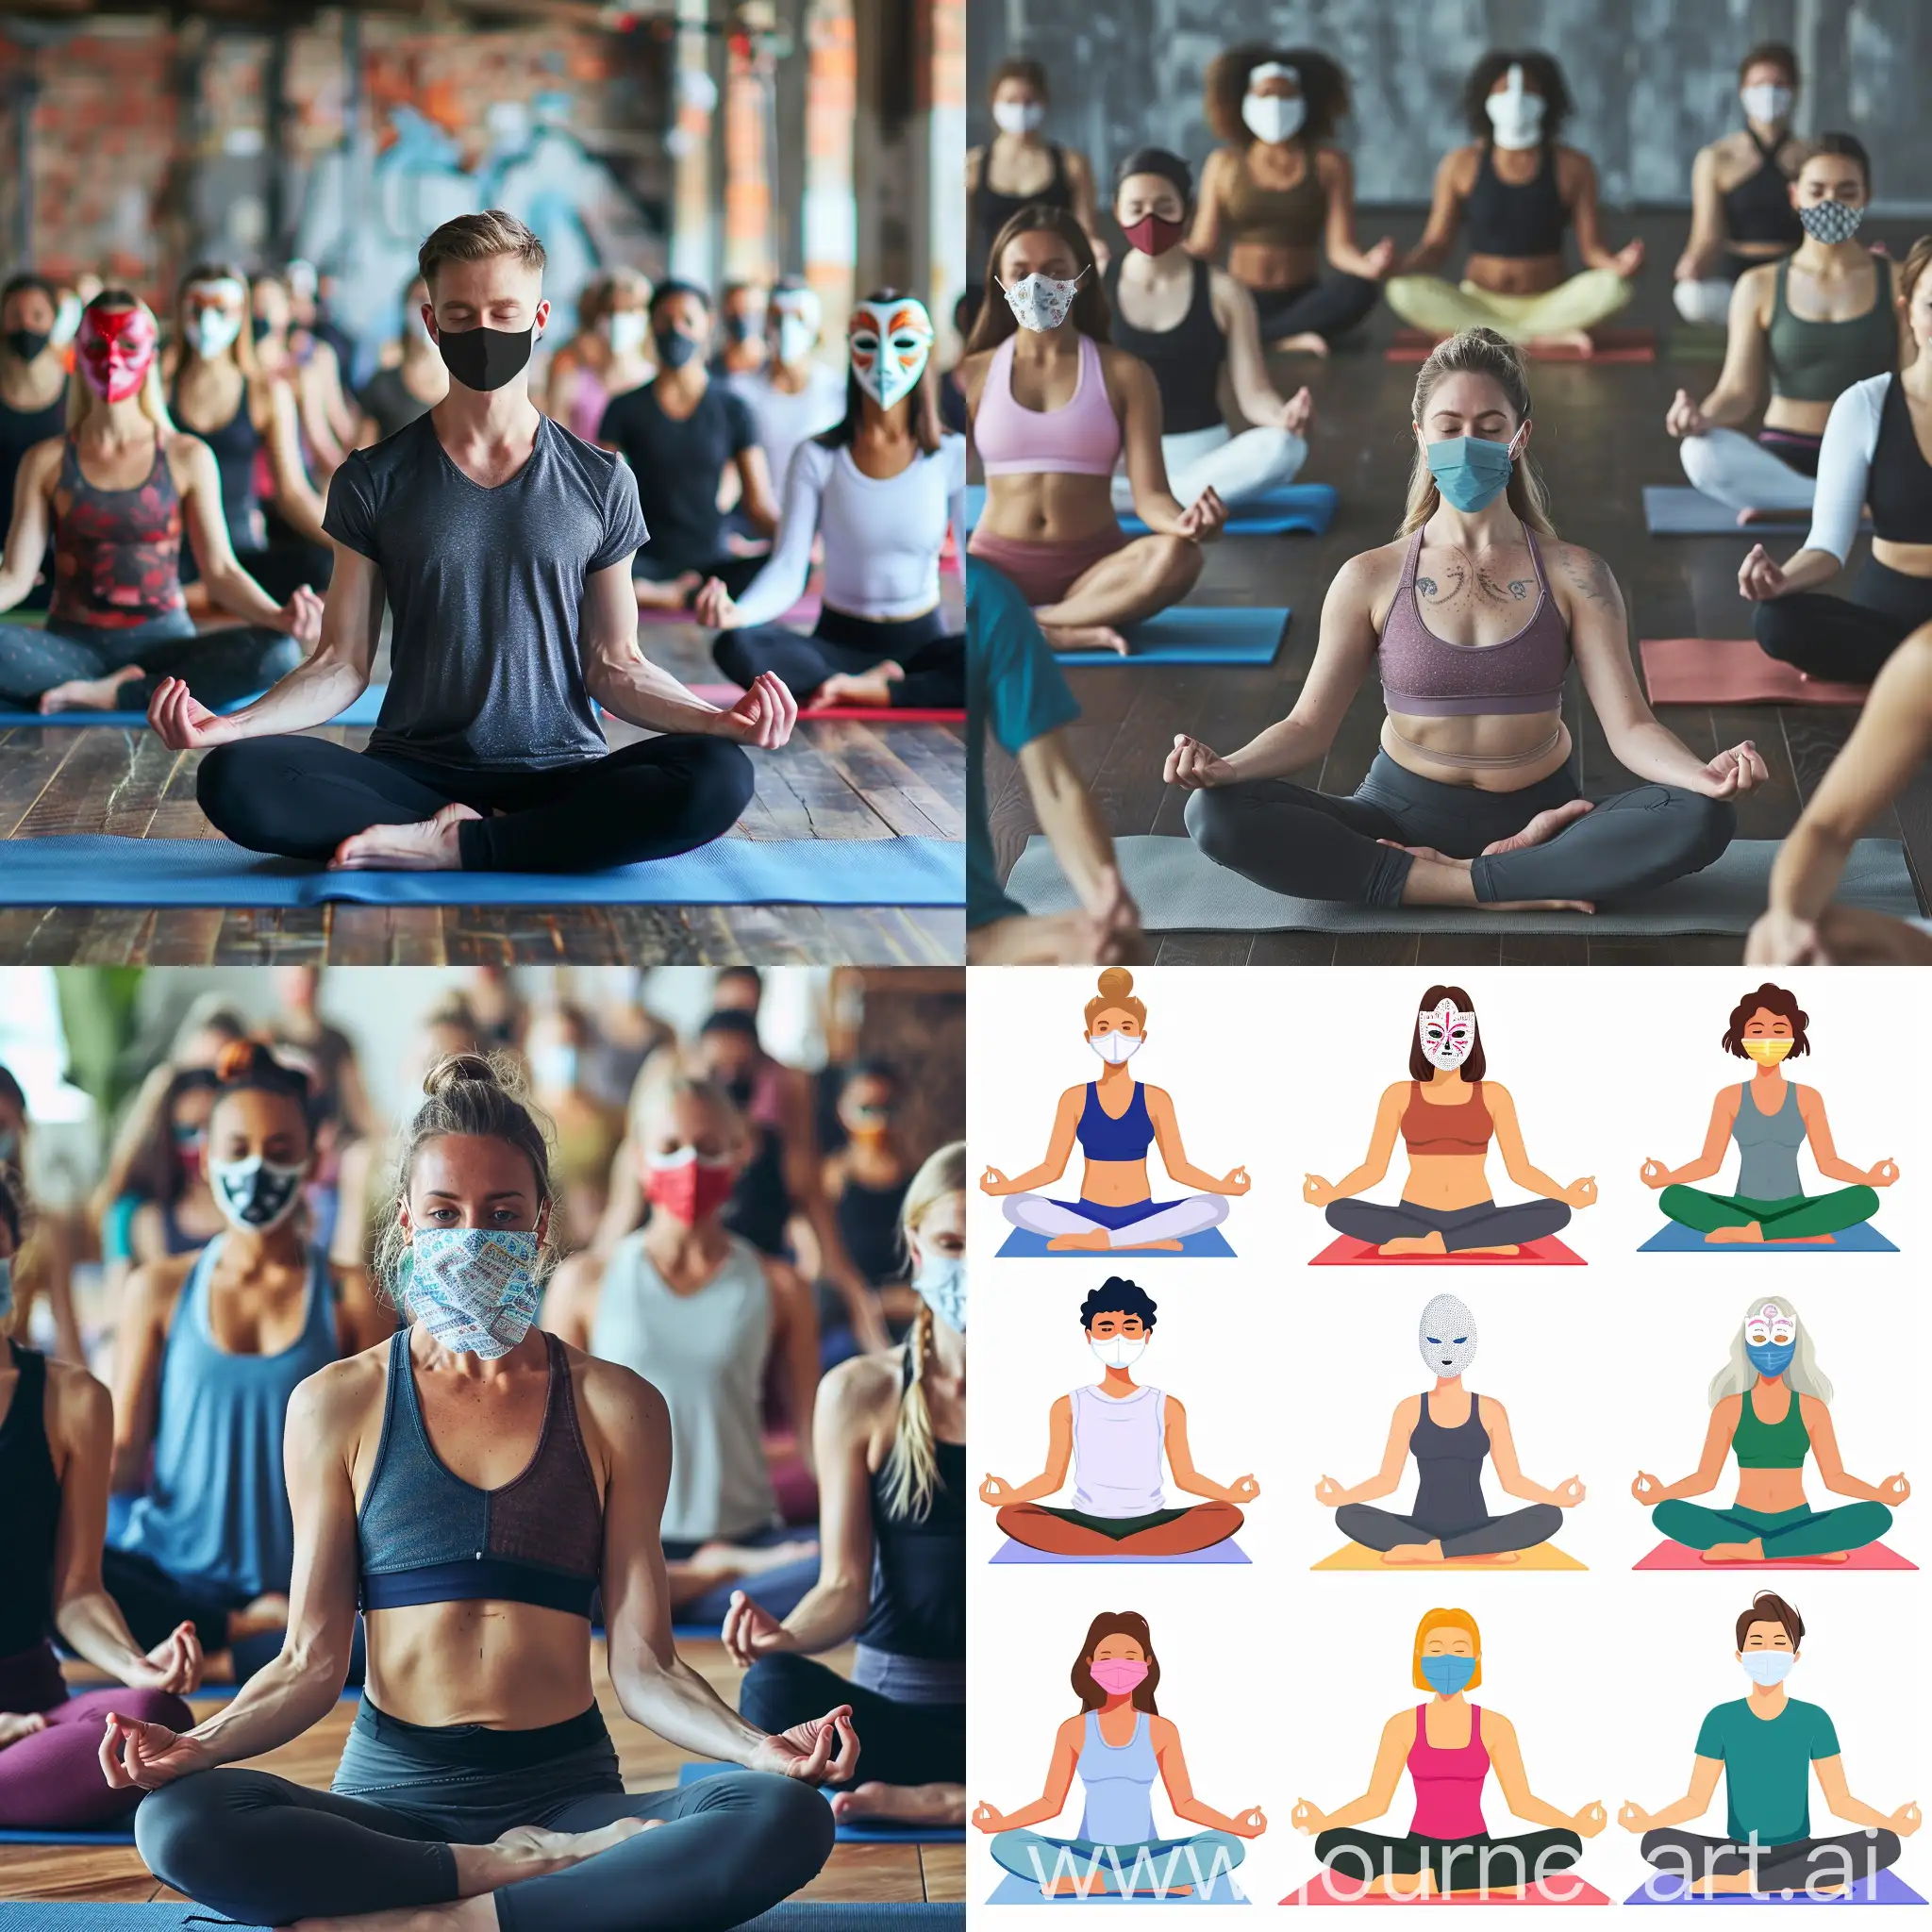 Yoga-Class-in-Lotus-Pose-with-Masks